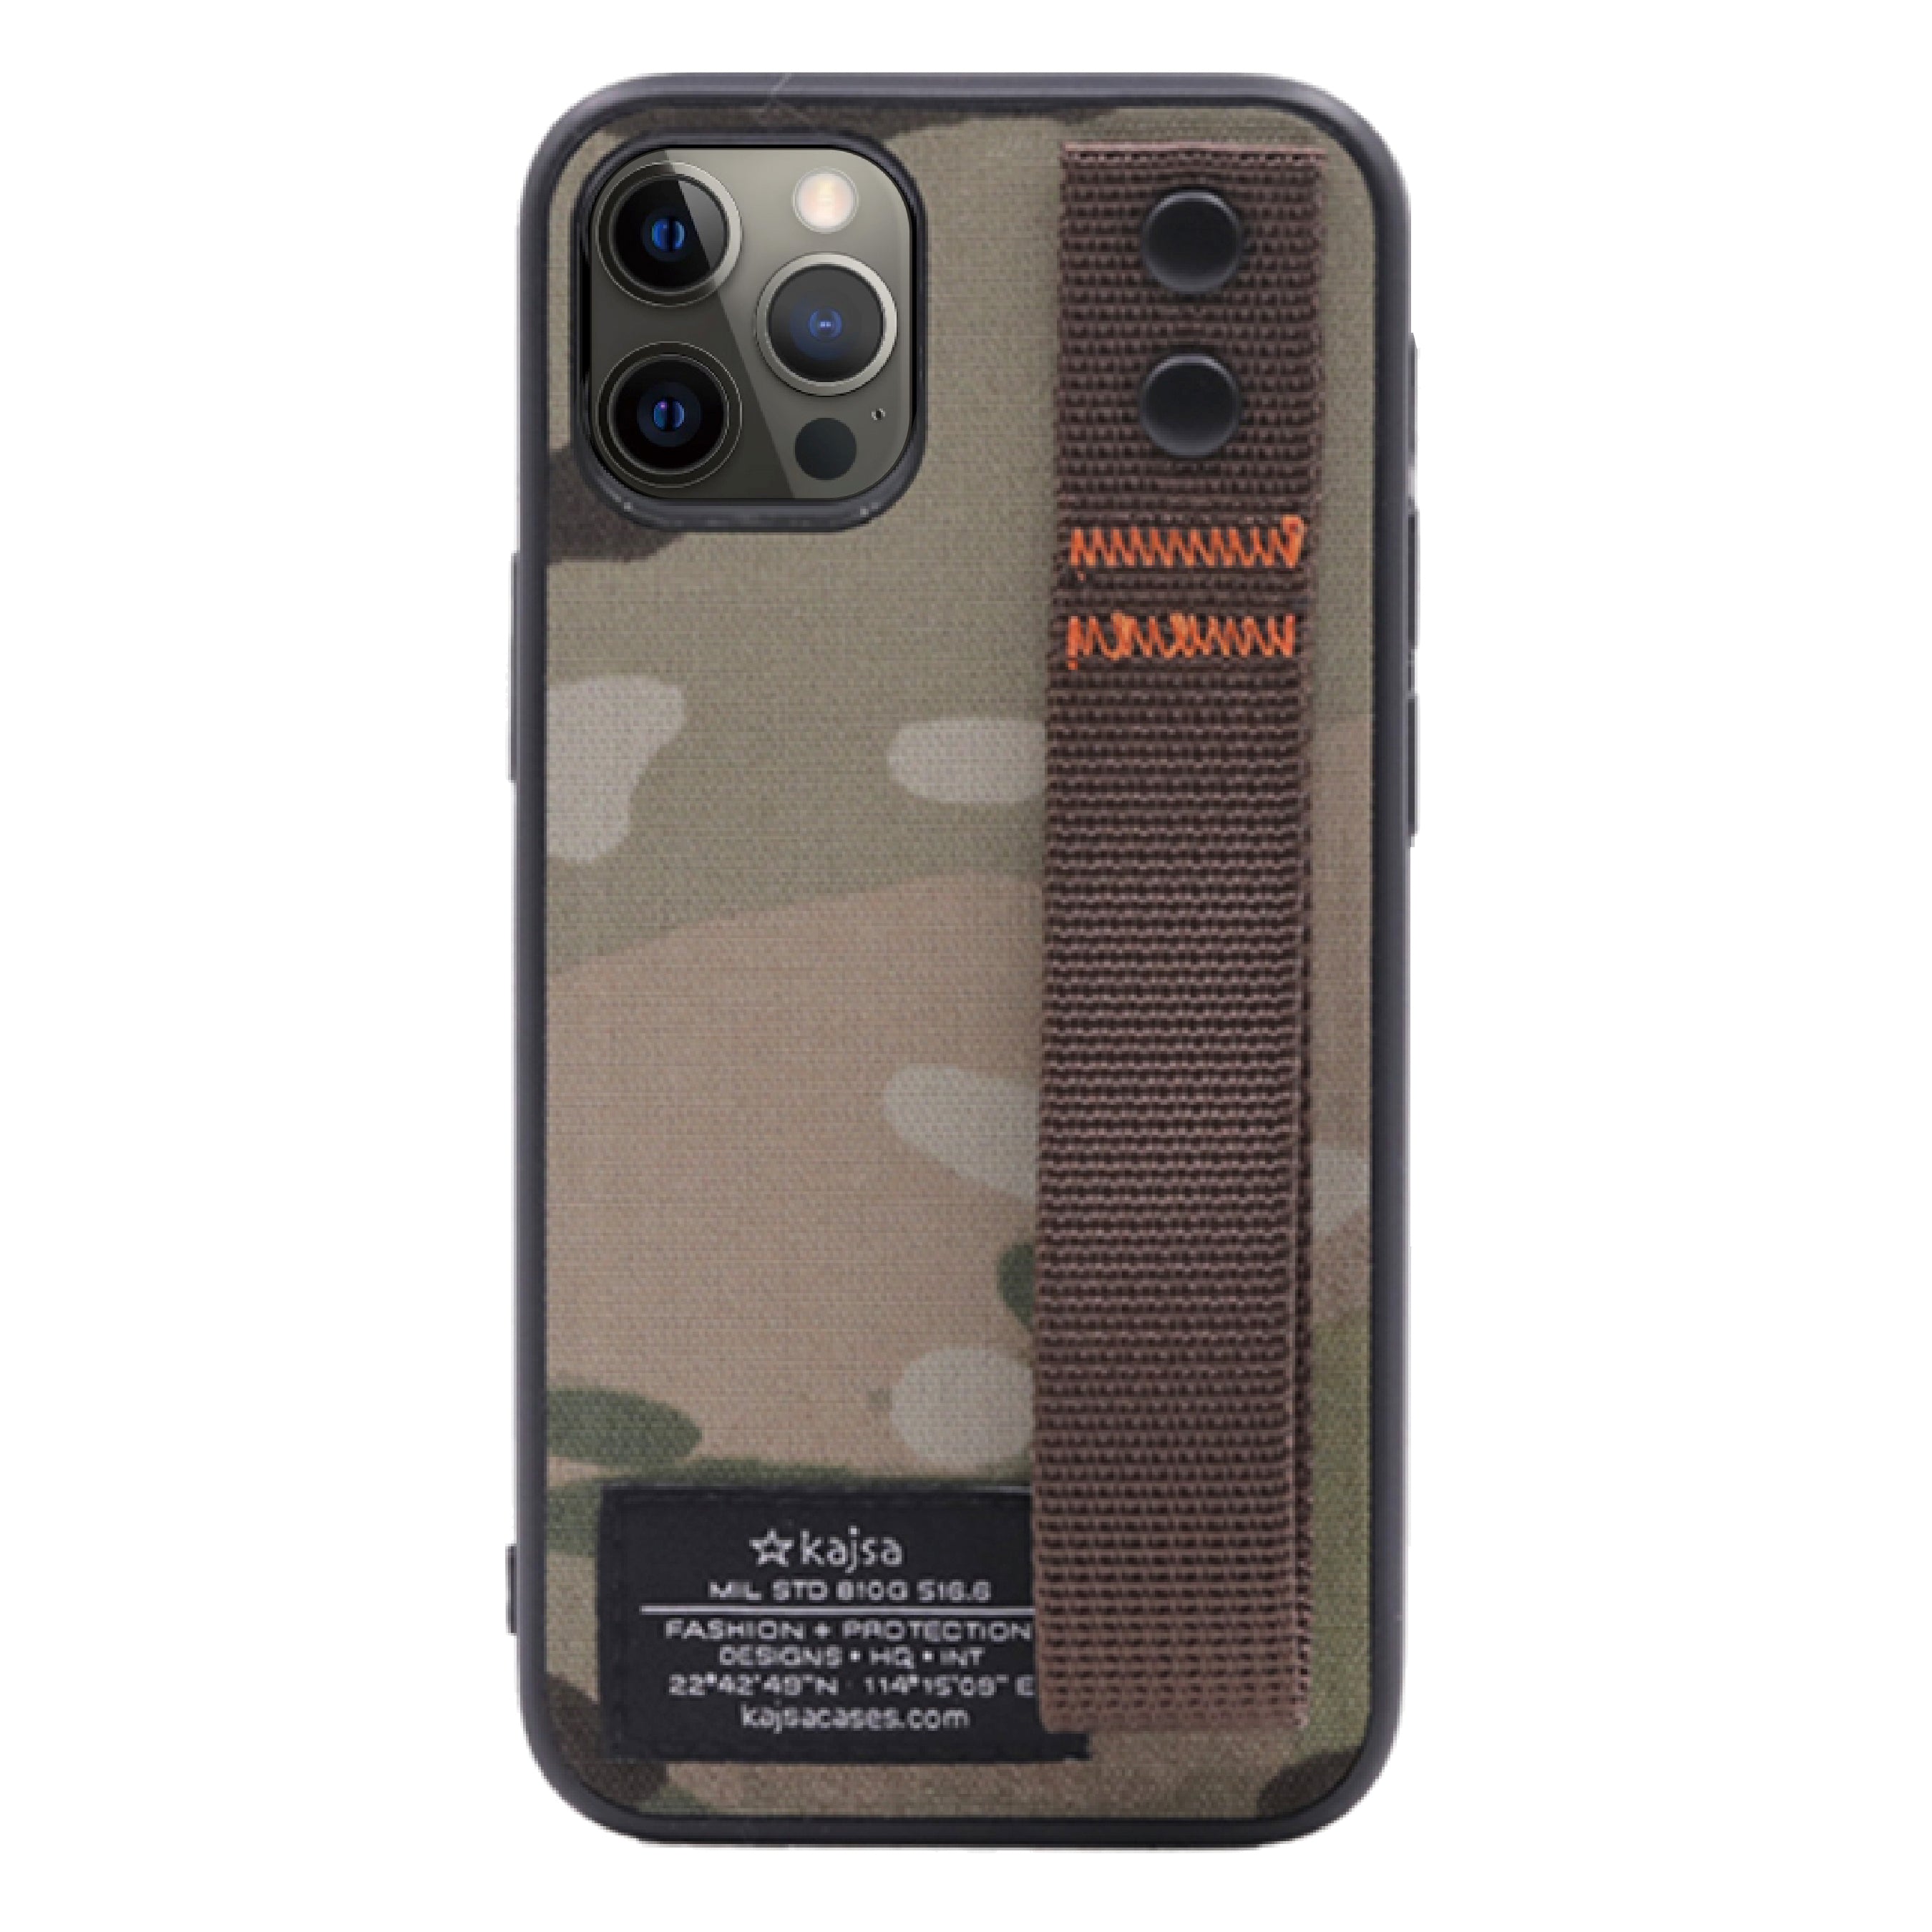 Military Collection - Straps back case for iPhone 12-Phone Case- phone case - phone cases- phone cover- iphone cover- iphone case- iphone cases- leather case- leather cases- DIYCASE - custom case - leather cover - hand strap case - croco pattern case - snake pattern case - carbon fiber phone case - phone case brand - unique phone case - high quality - phone case brand - protective case - buy phone case hong kong - online buy phone case - iphone‎手機殼 - 客製化手機殼 - samsung ‎手機殼 - 香港手機殼 - 買電話殼